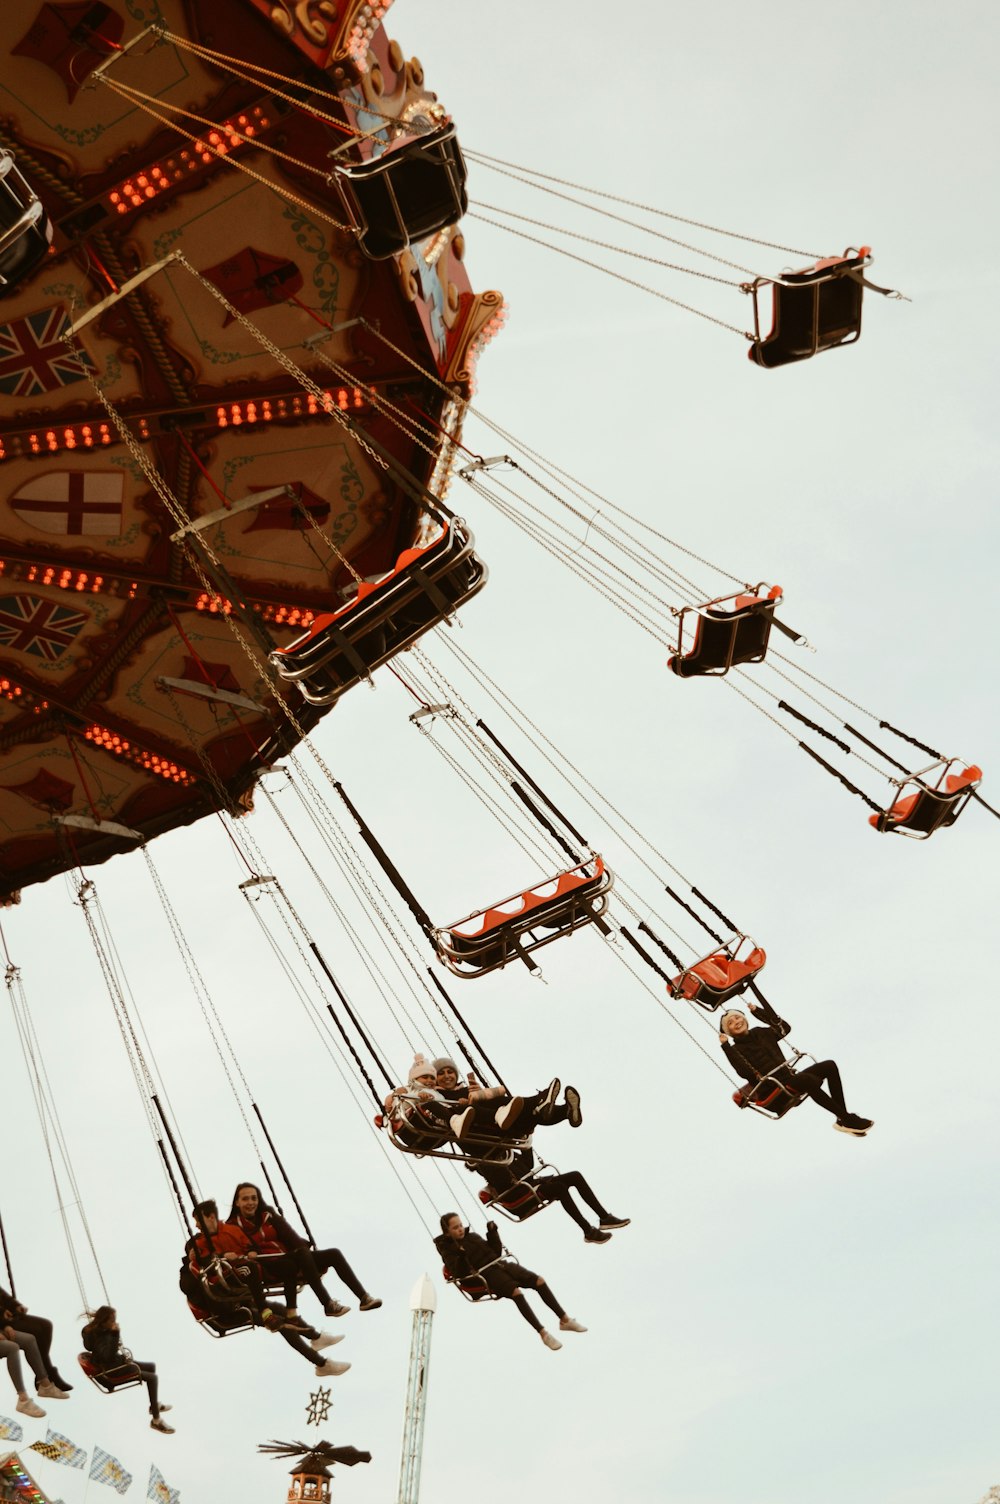 people riding in amusement park